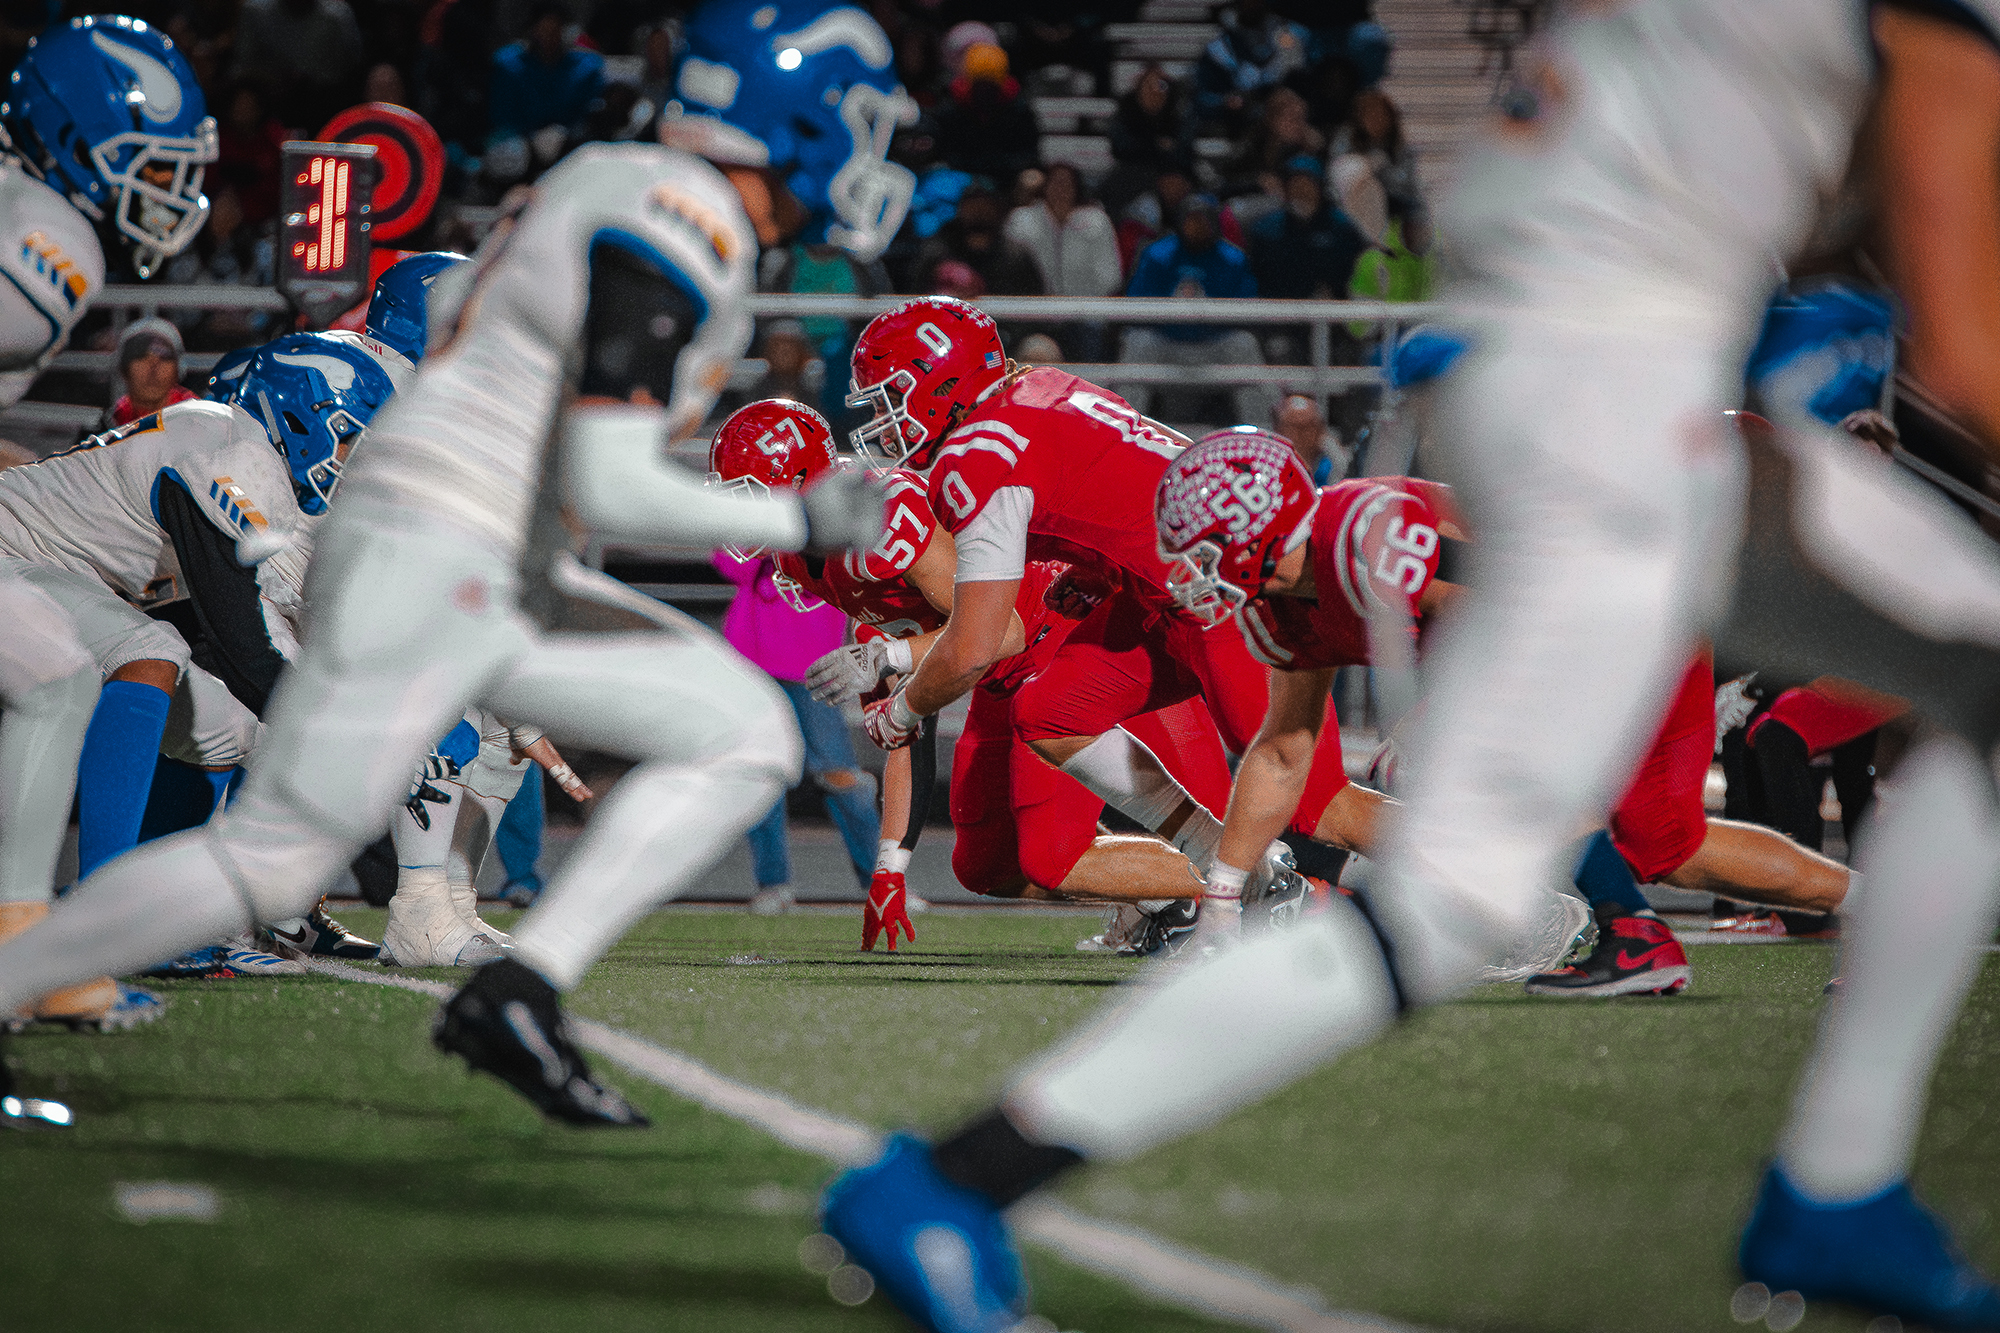 As Omaha North advances down the field, the Millard South defense stops them in their tracks.